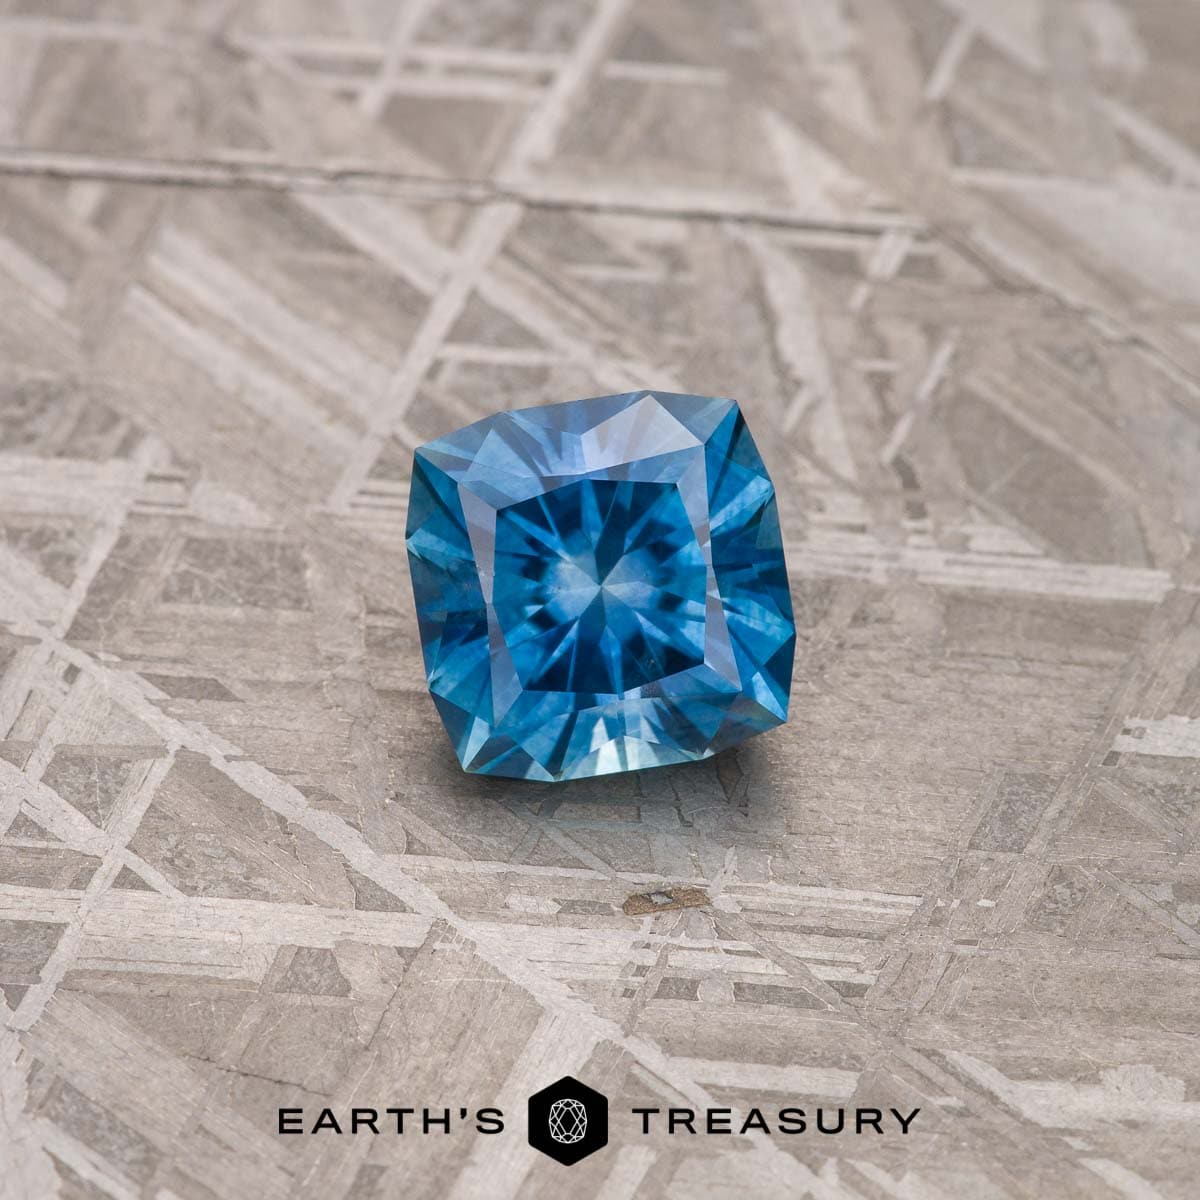 <h3>Montana Sapphires</h3><br>
See our collection